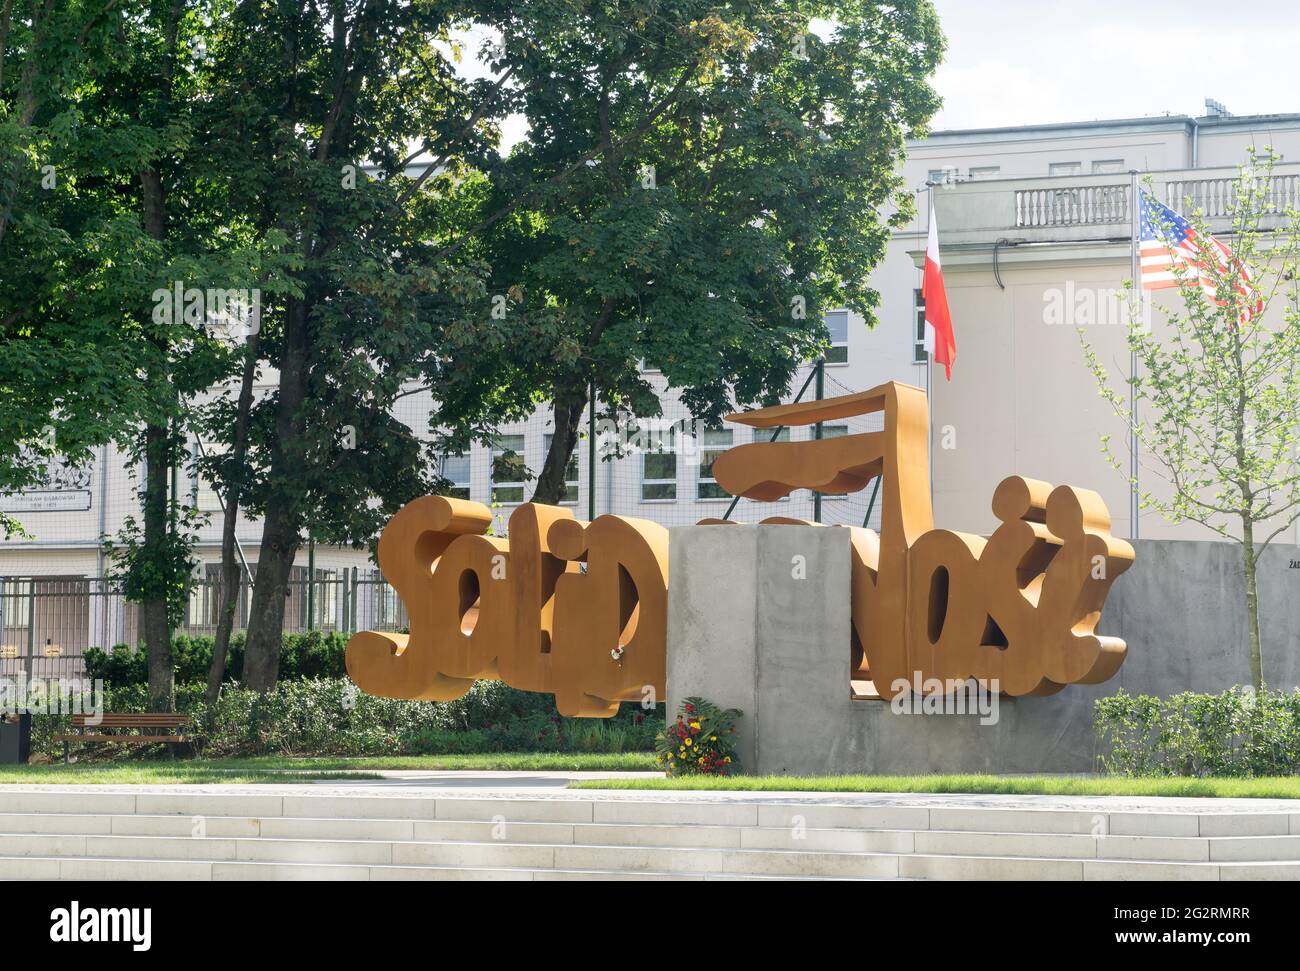 WARSAW, POLAND, jUNE 11,2021: The Solidarity 'Solidarność' Monument in Warsaw unveiled on June 04, 2021 on the occasion of the 32nd anniversary of the Stock Photo